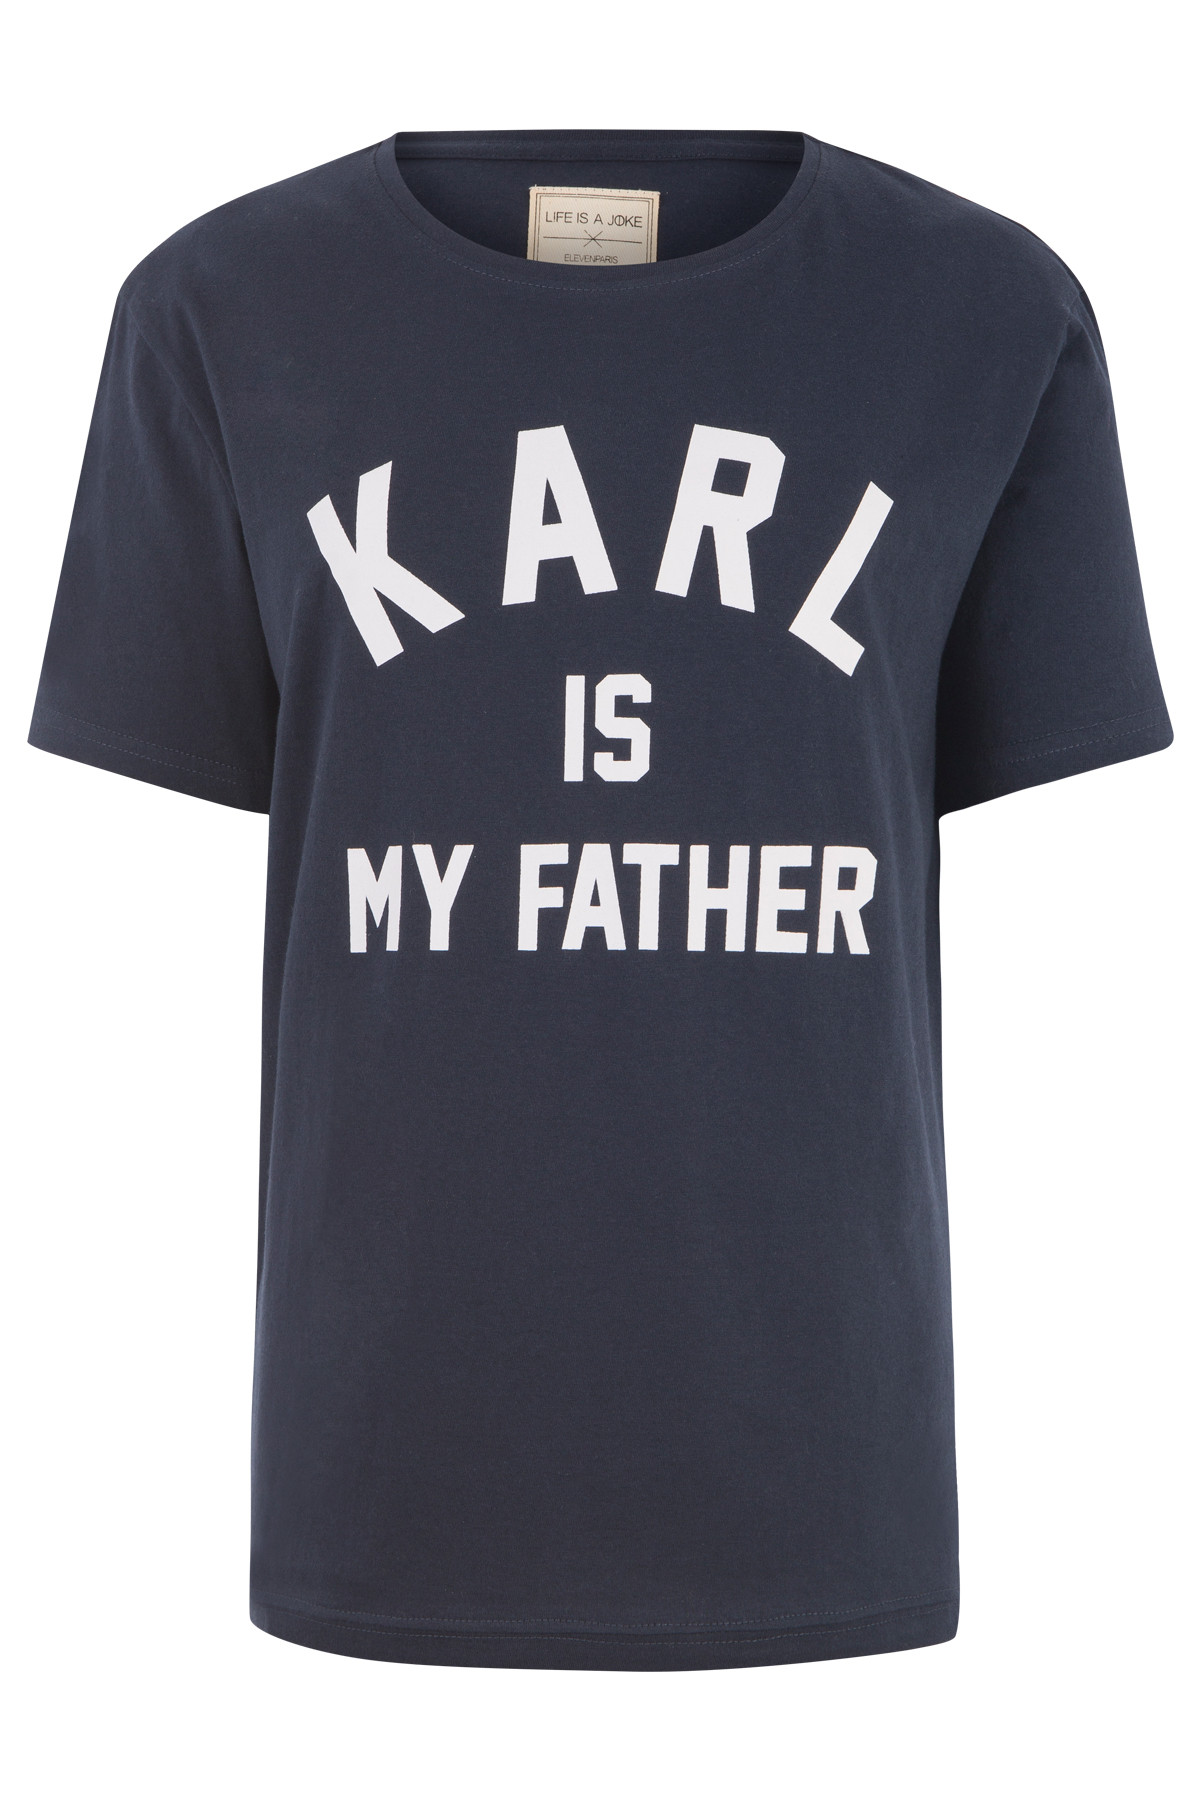 eleven-paris-karl-is-my-father-t-shirt-navy-product